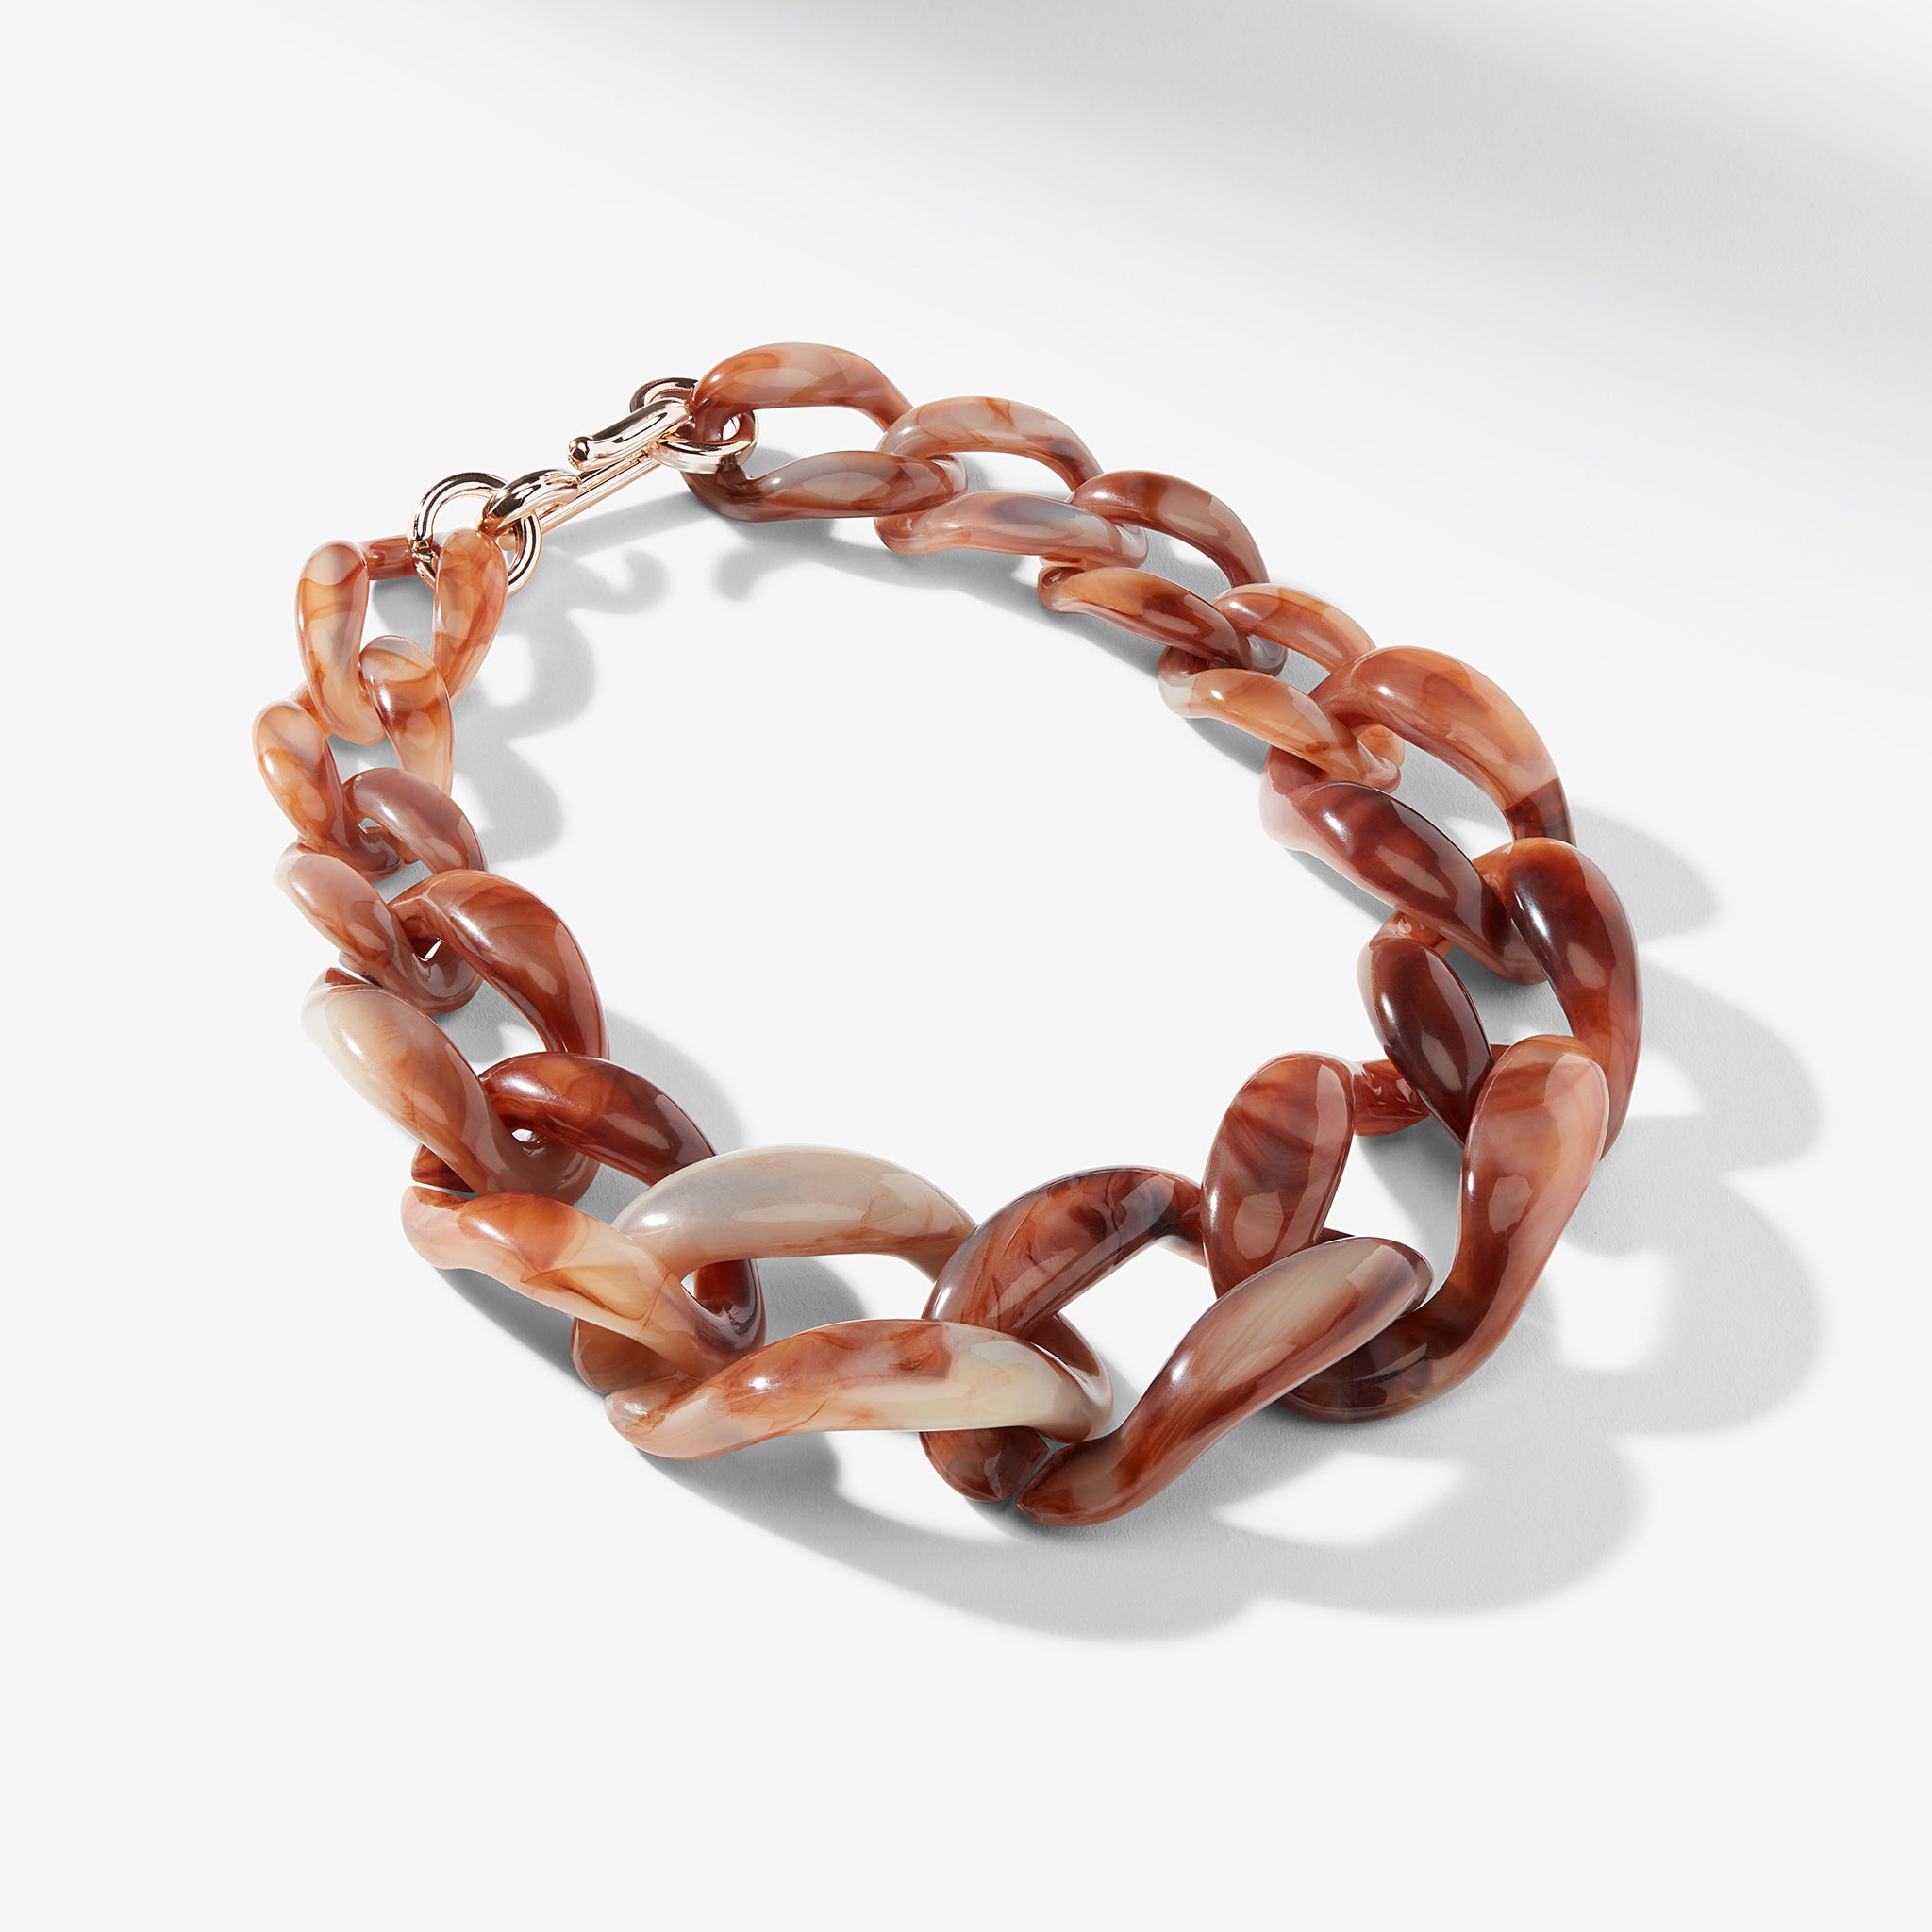 Packshot image of the lygia necklace in ivory/brown multi